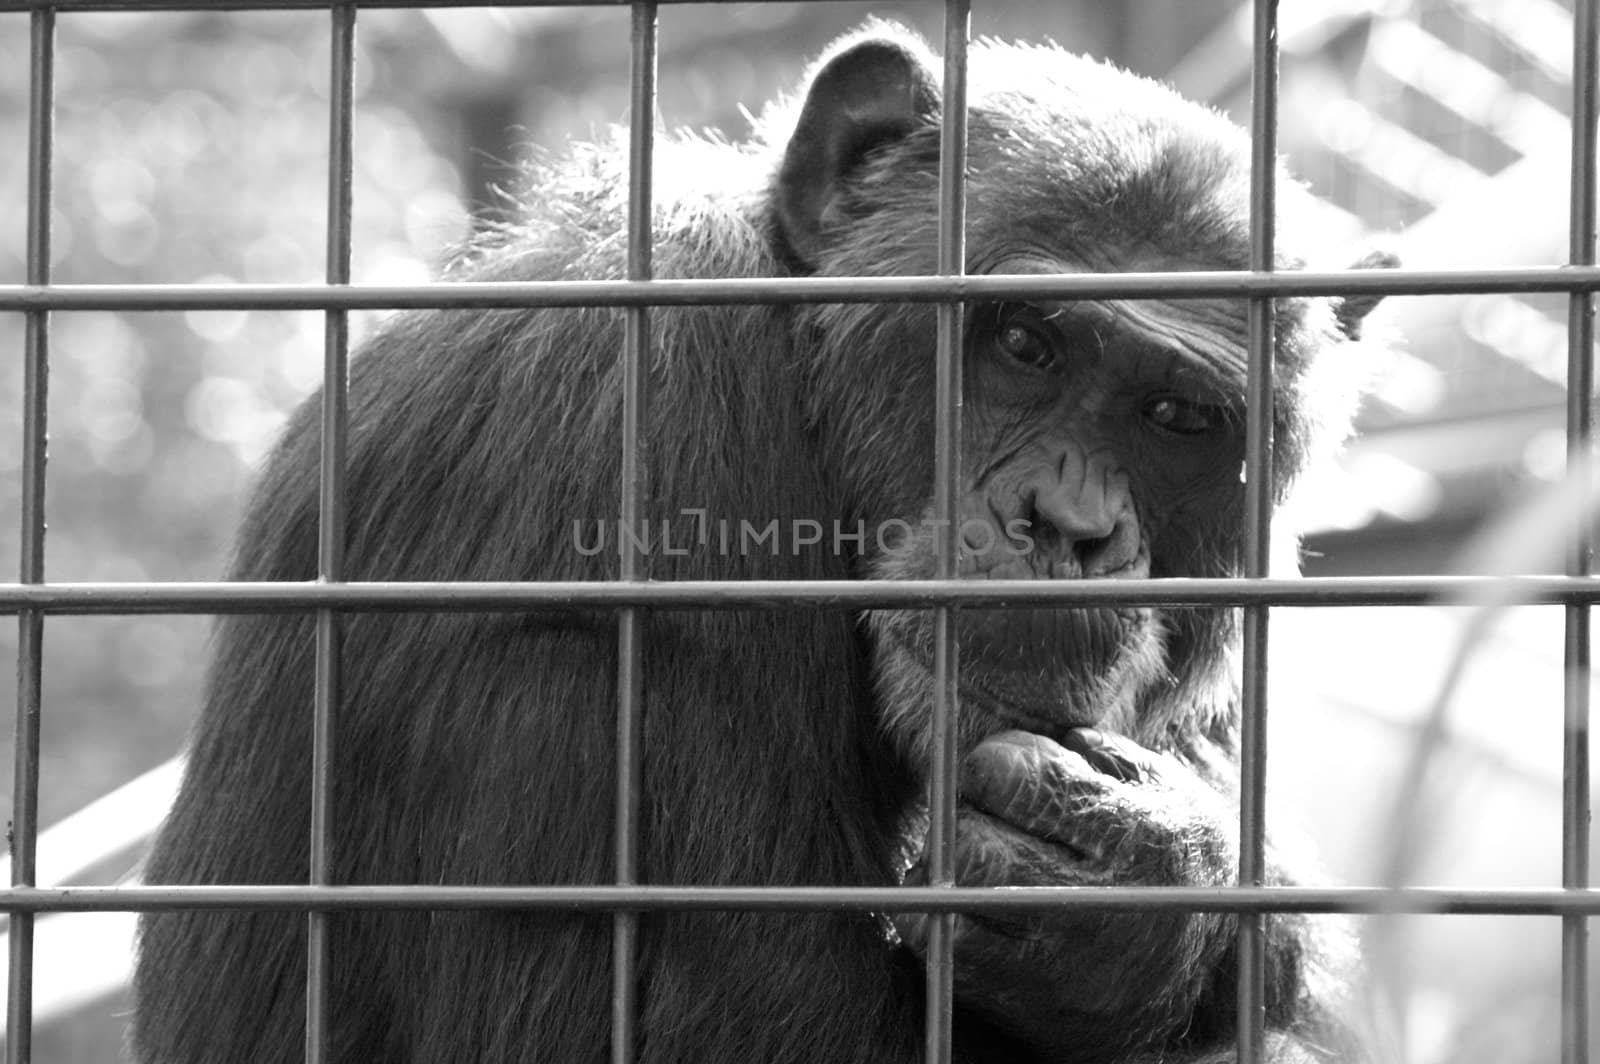 The sight of a monkey by photochecker